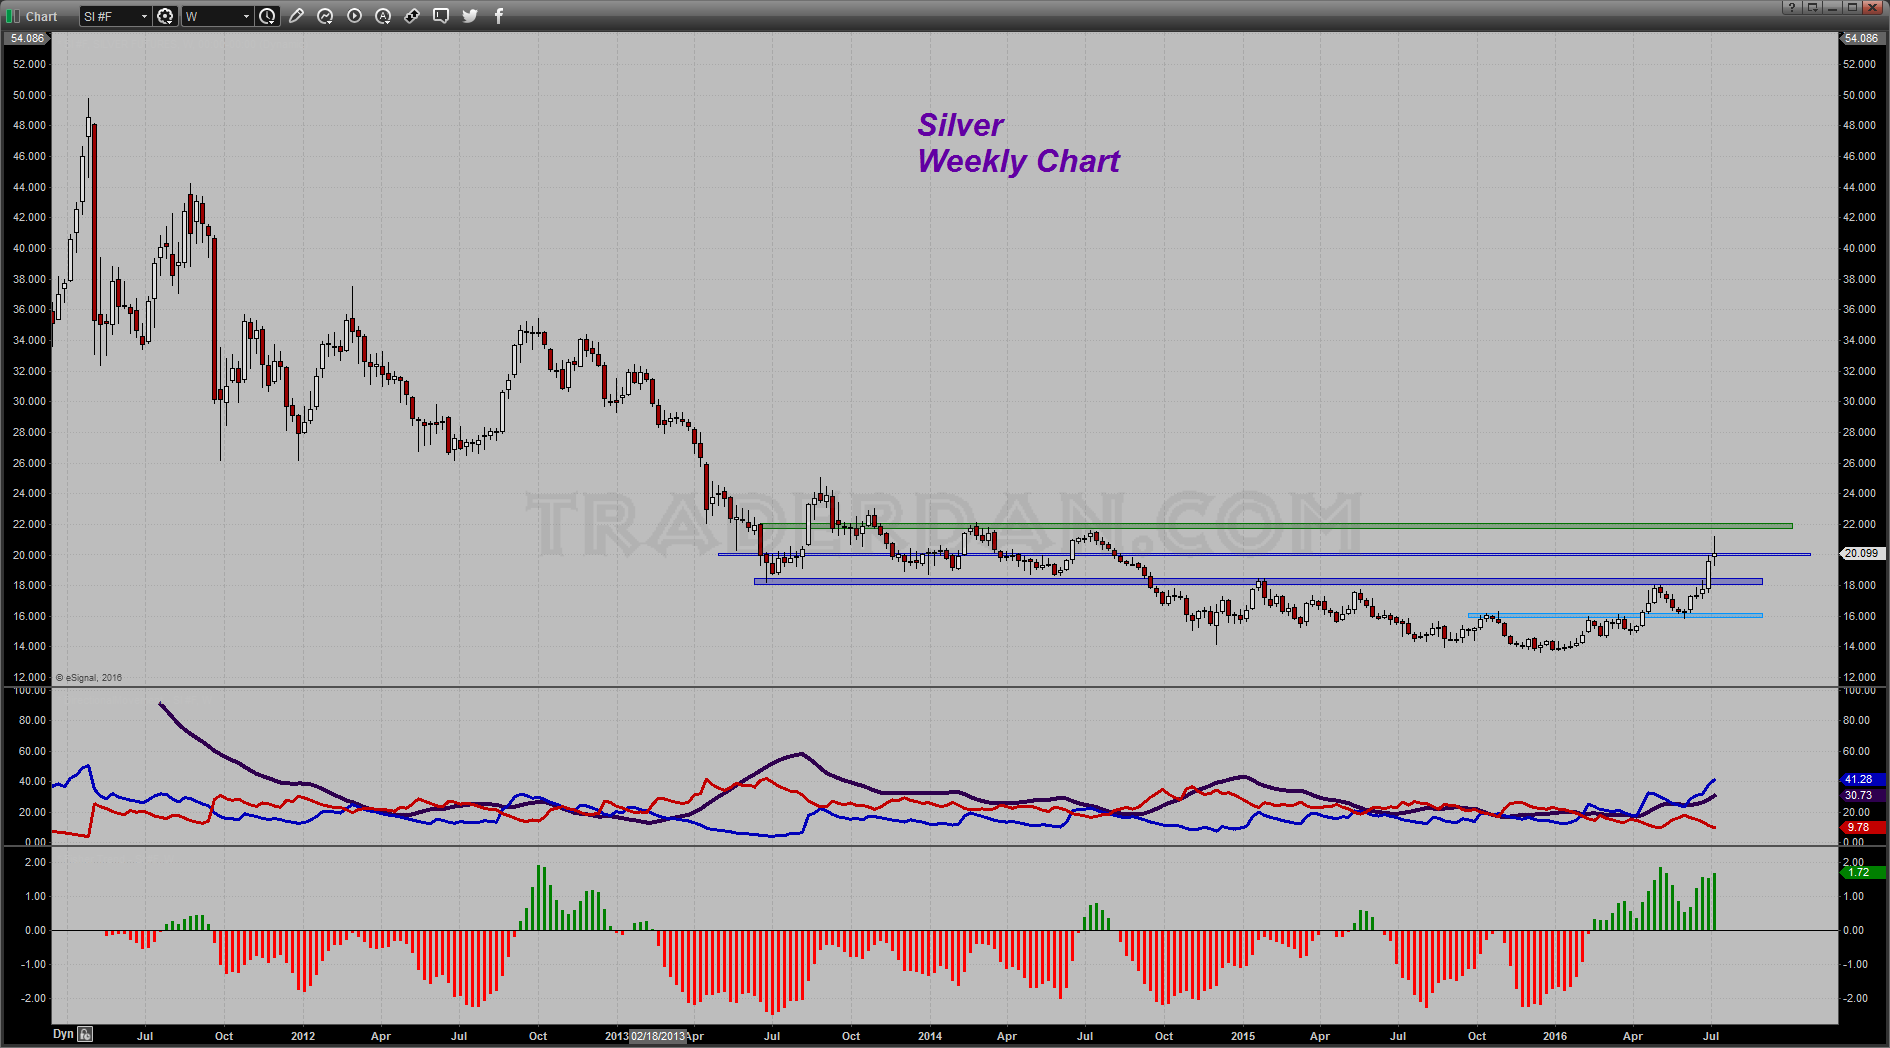 Silver Weekly 2011-2016